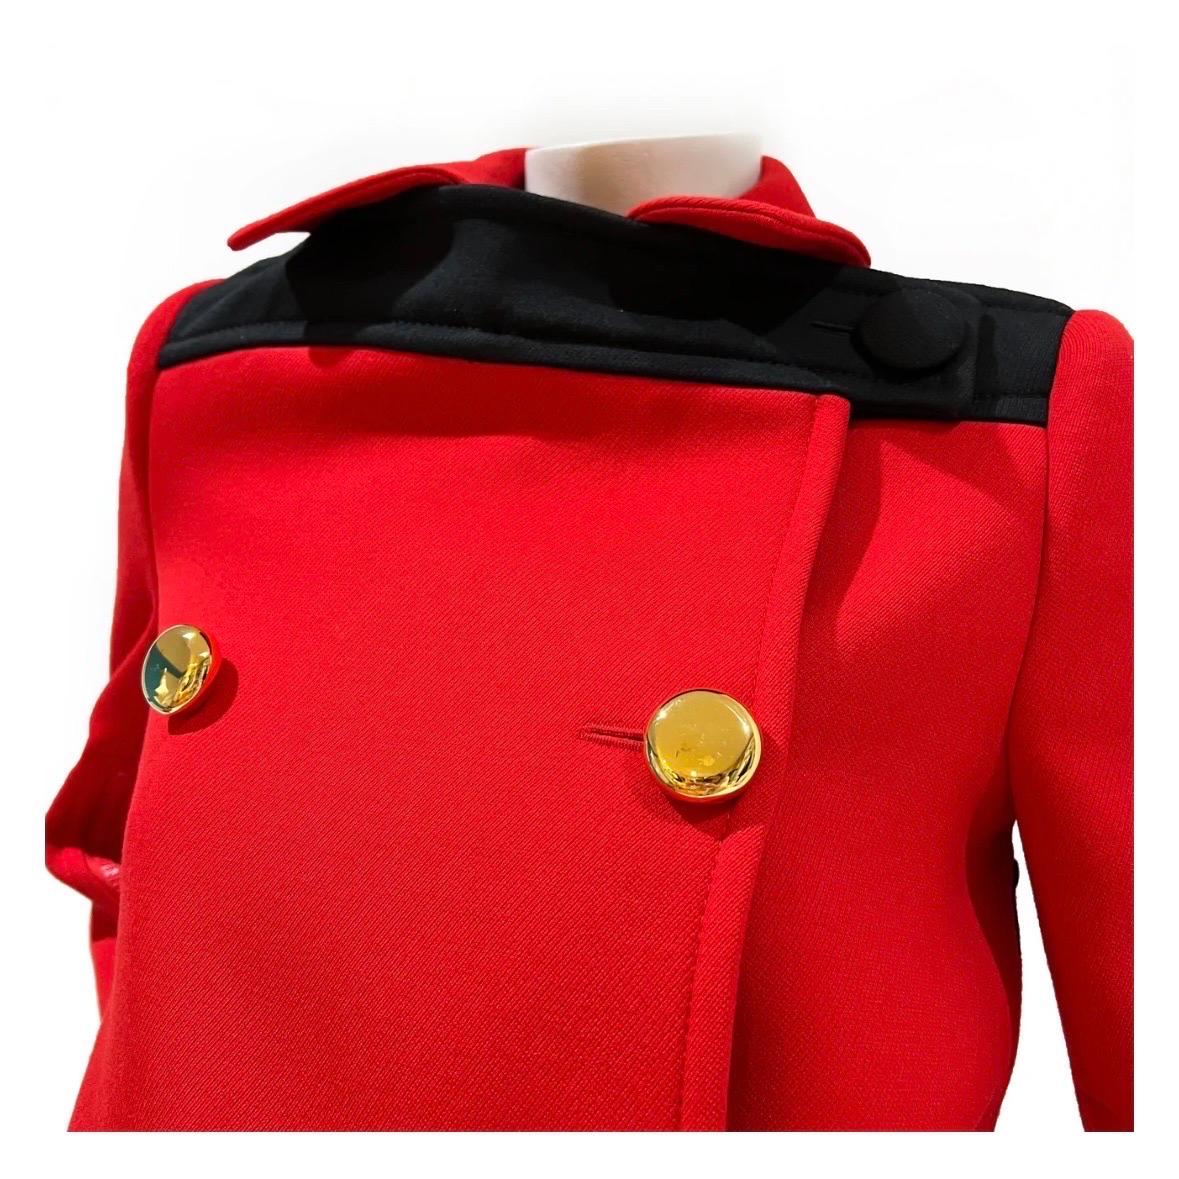 Double Breasted Jacket by Prada 
Spring 2019 
Red 
Black yoke across the front and back of the shoulders  
Double breasted 
Gold buttons on front of jacket 
Zipper cuffs   
Structure Shoulders
Fabric Composition; 100% Virgin Wool, 100% Viscose